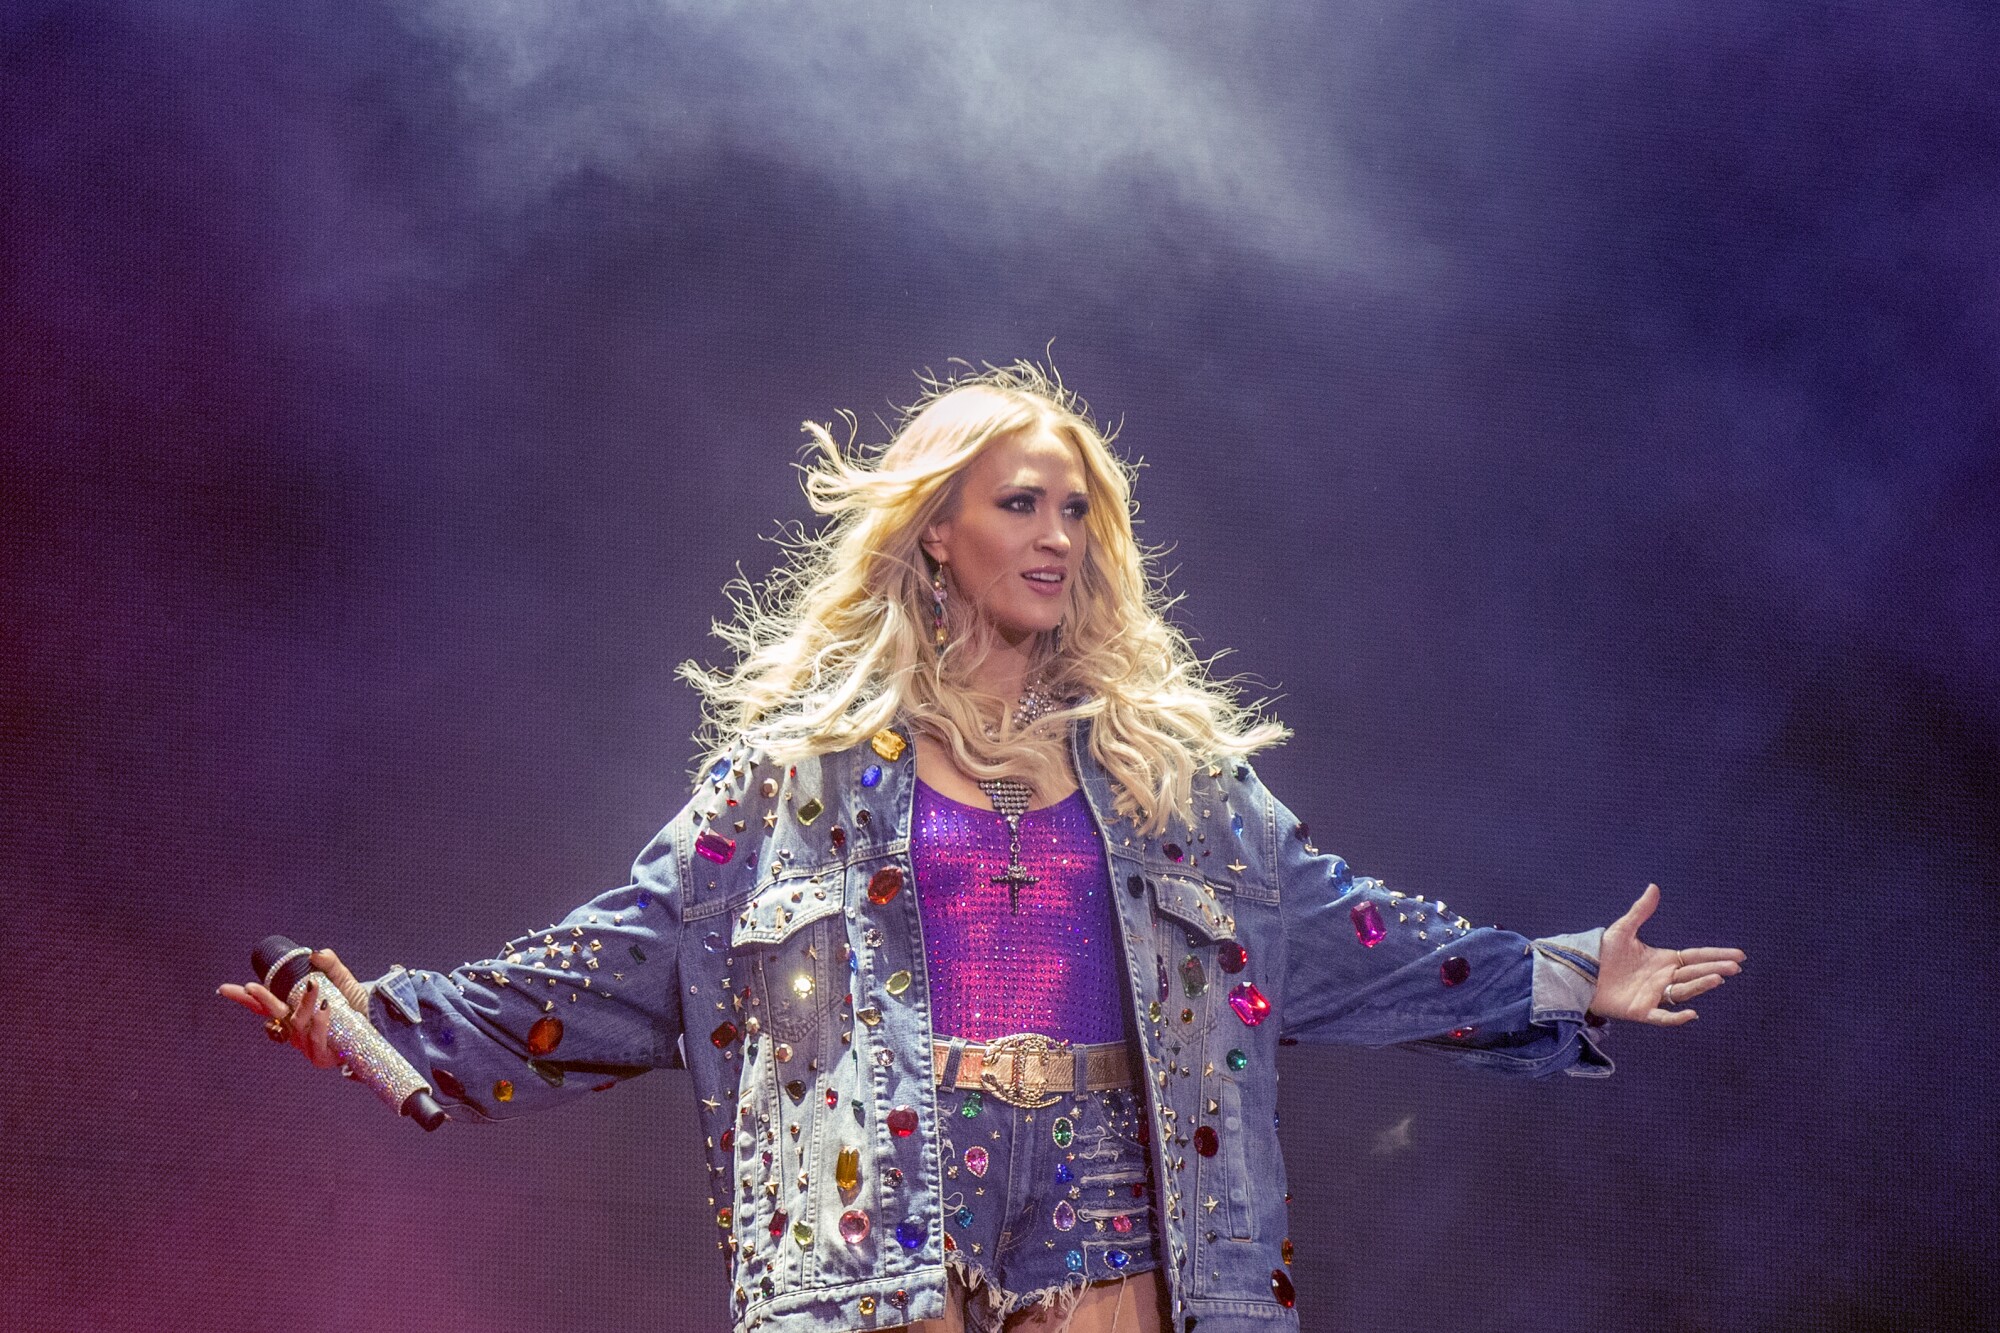 Carrie Underwood holds her arms up to the side as she performs onstage